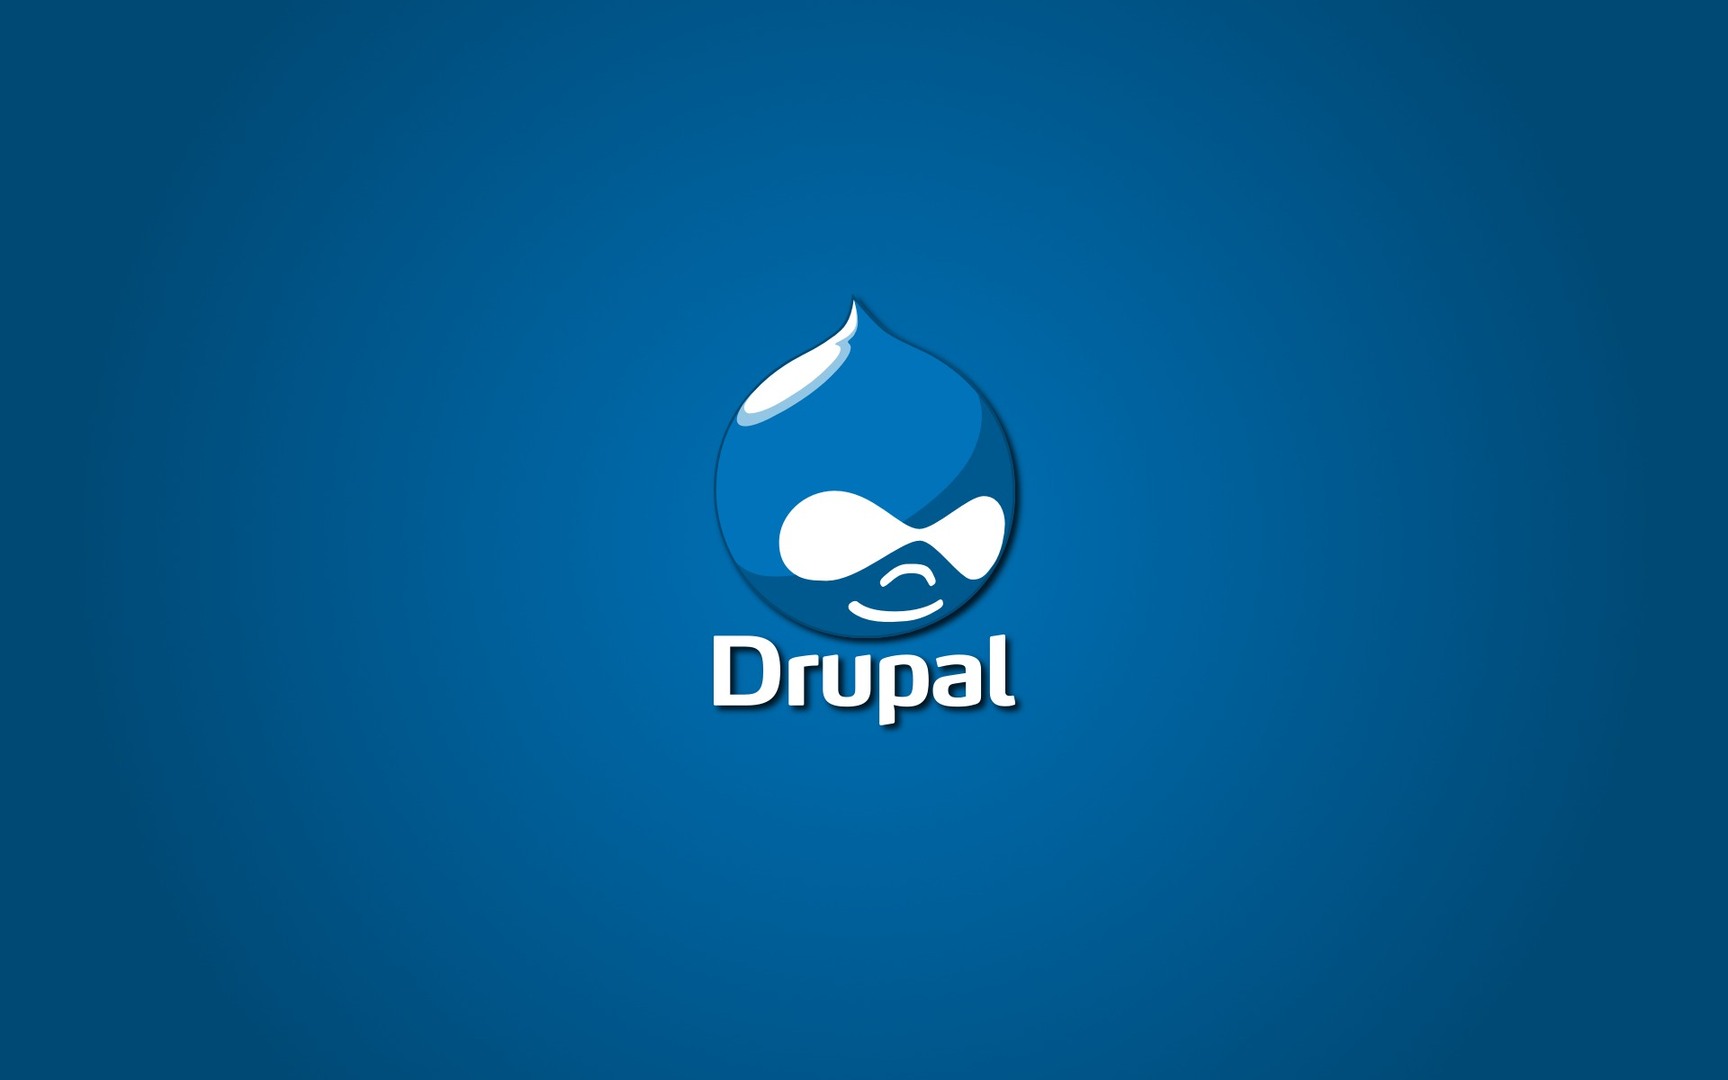 Why Use Drupal..?